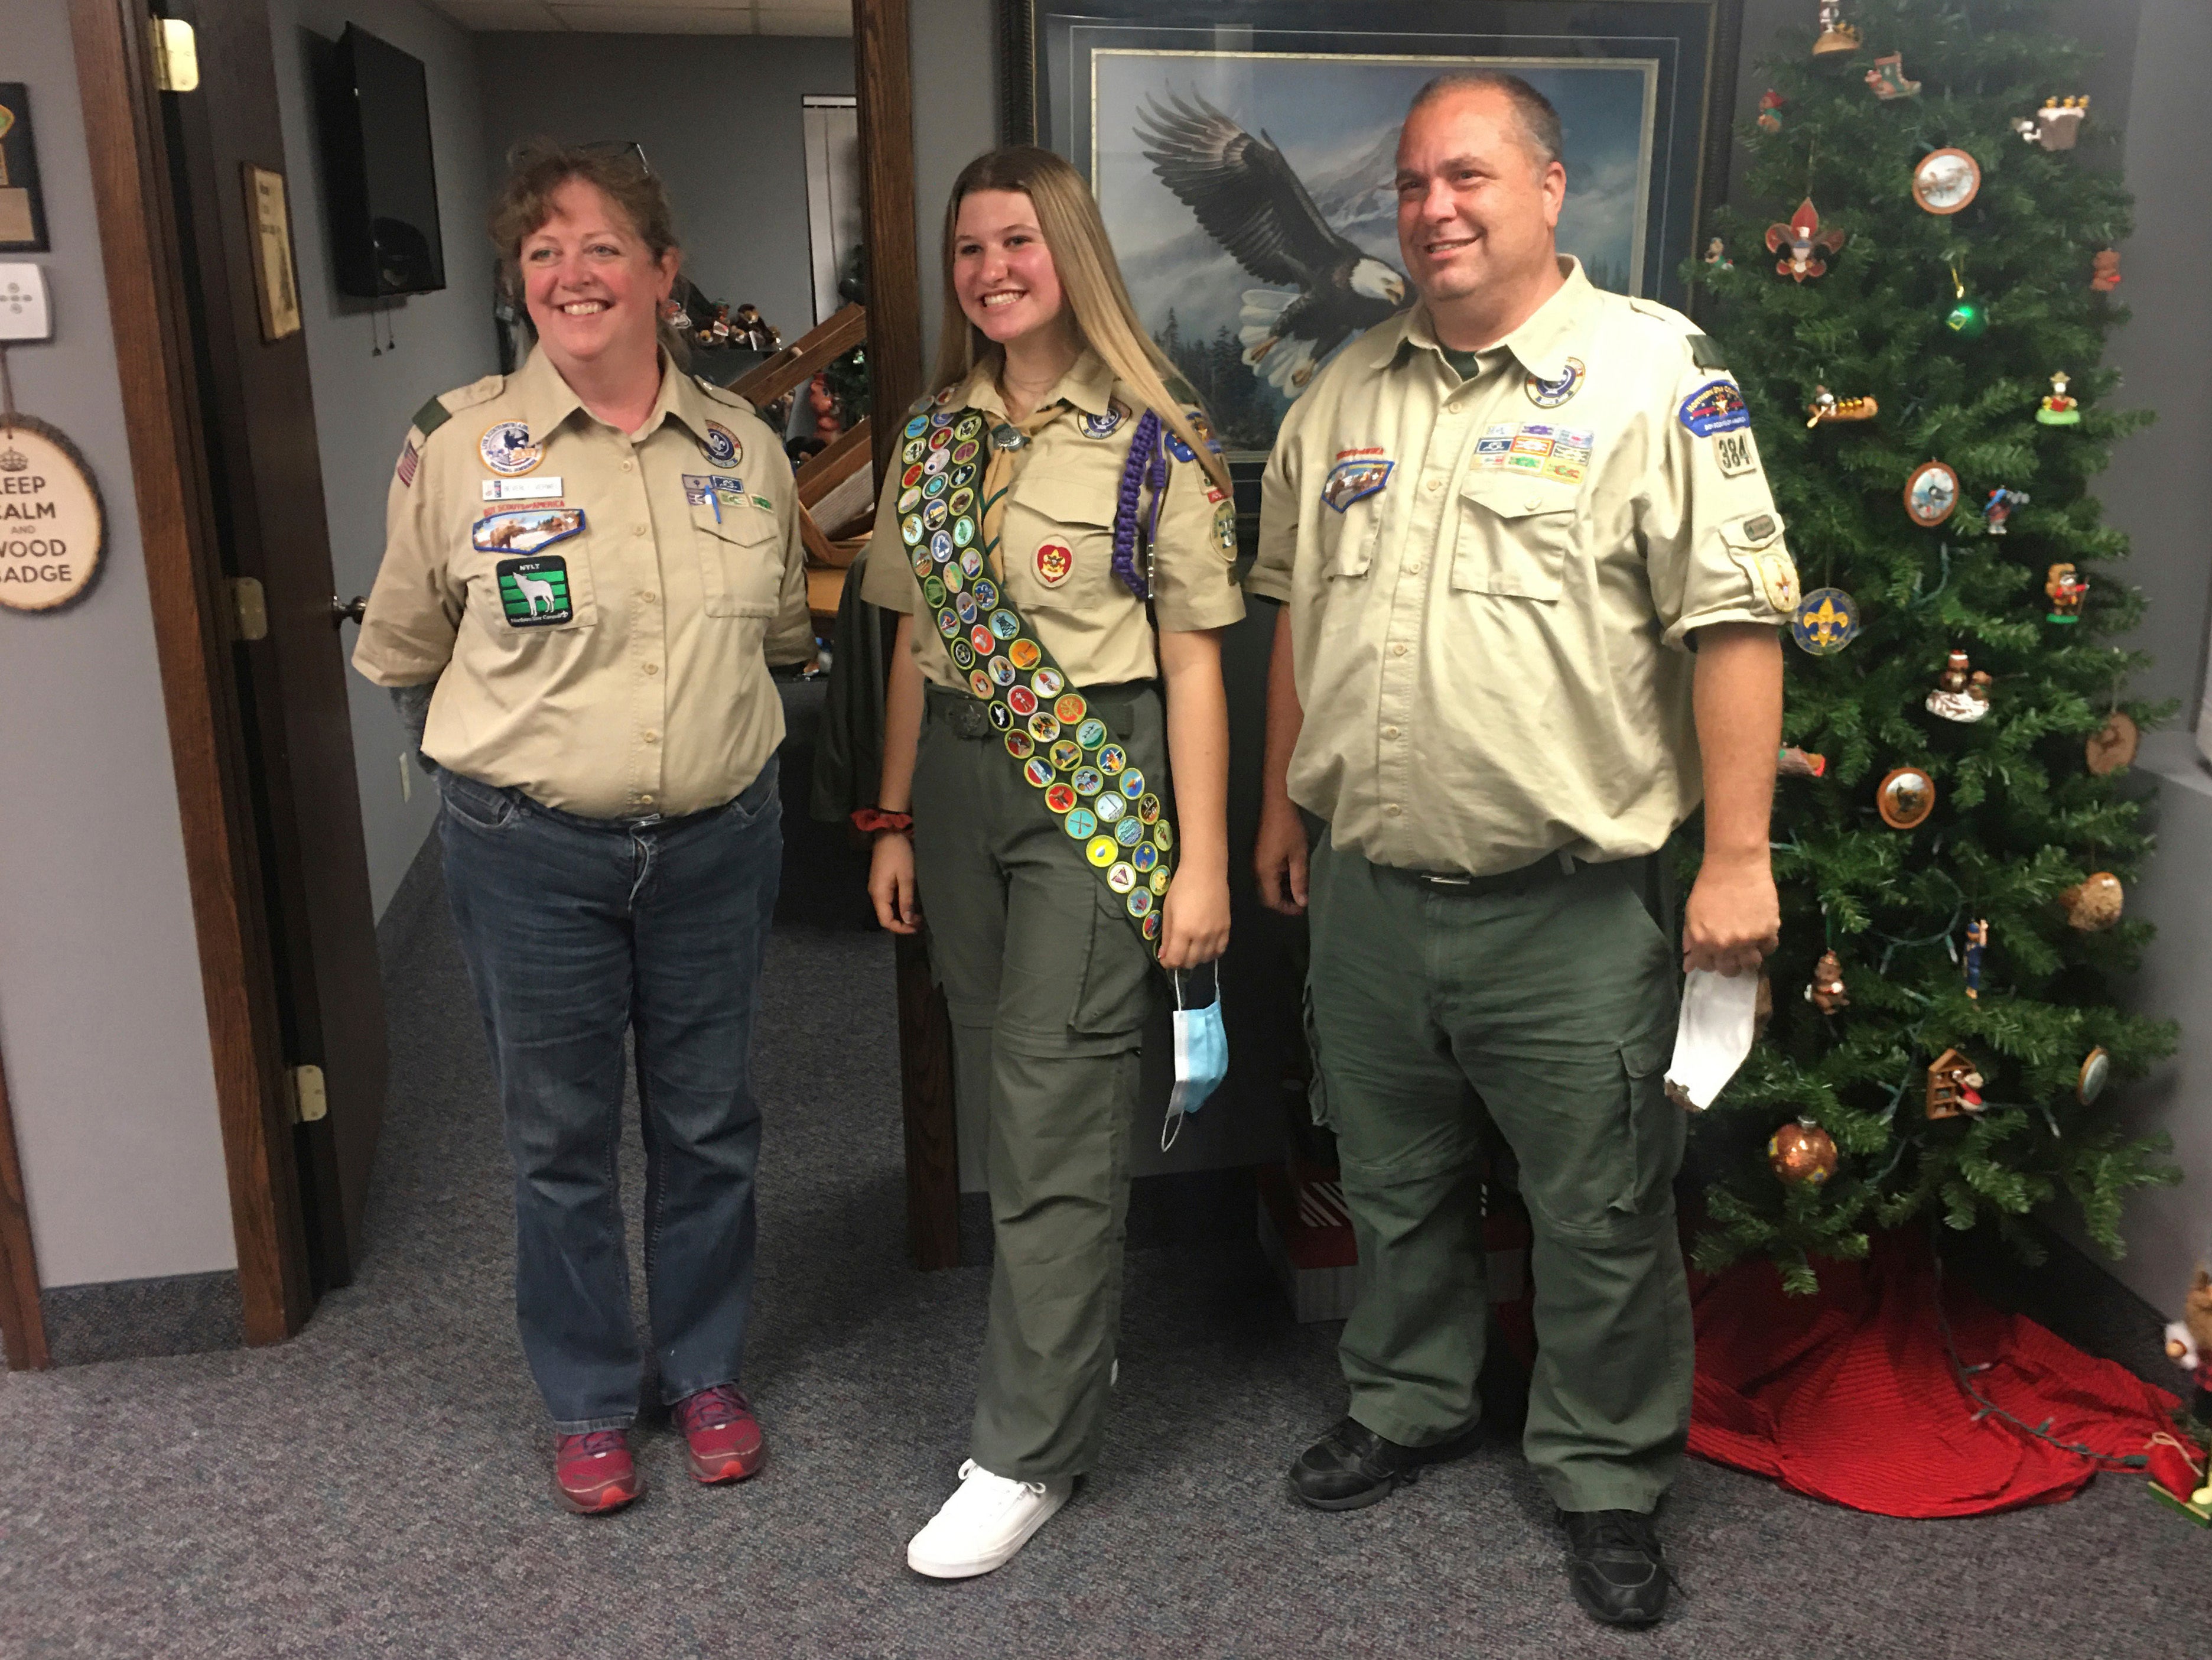 Boy Scouts Celebrate The First Group Of Female Eagle Scouts Rank